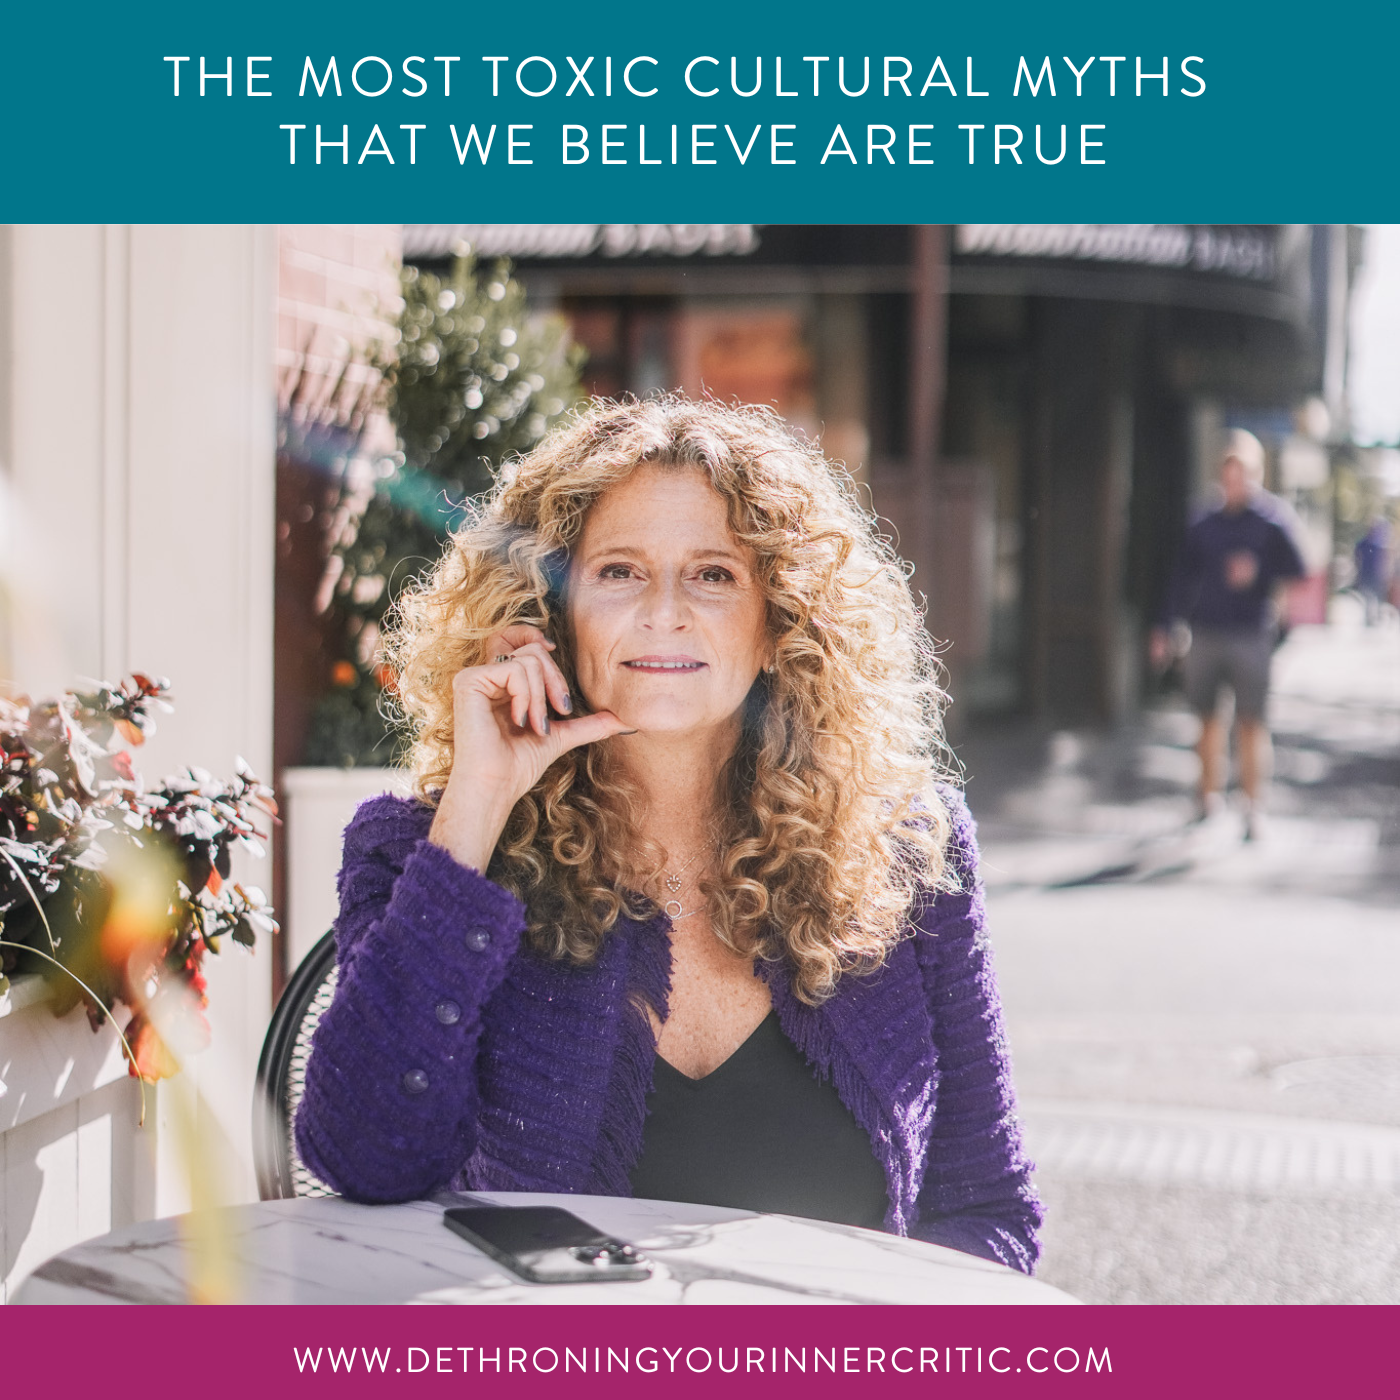 The most toxic cultural myths that we believe are true